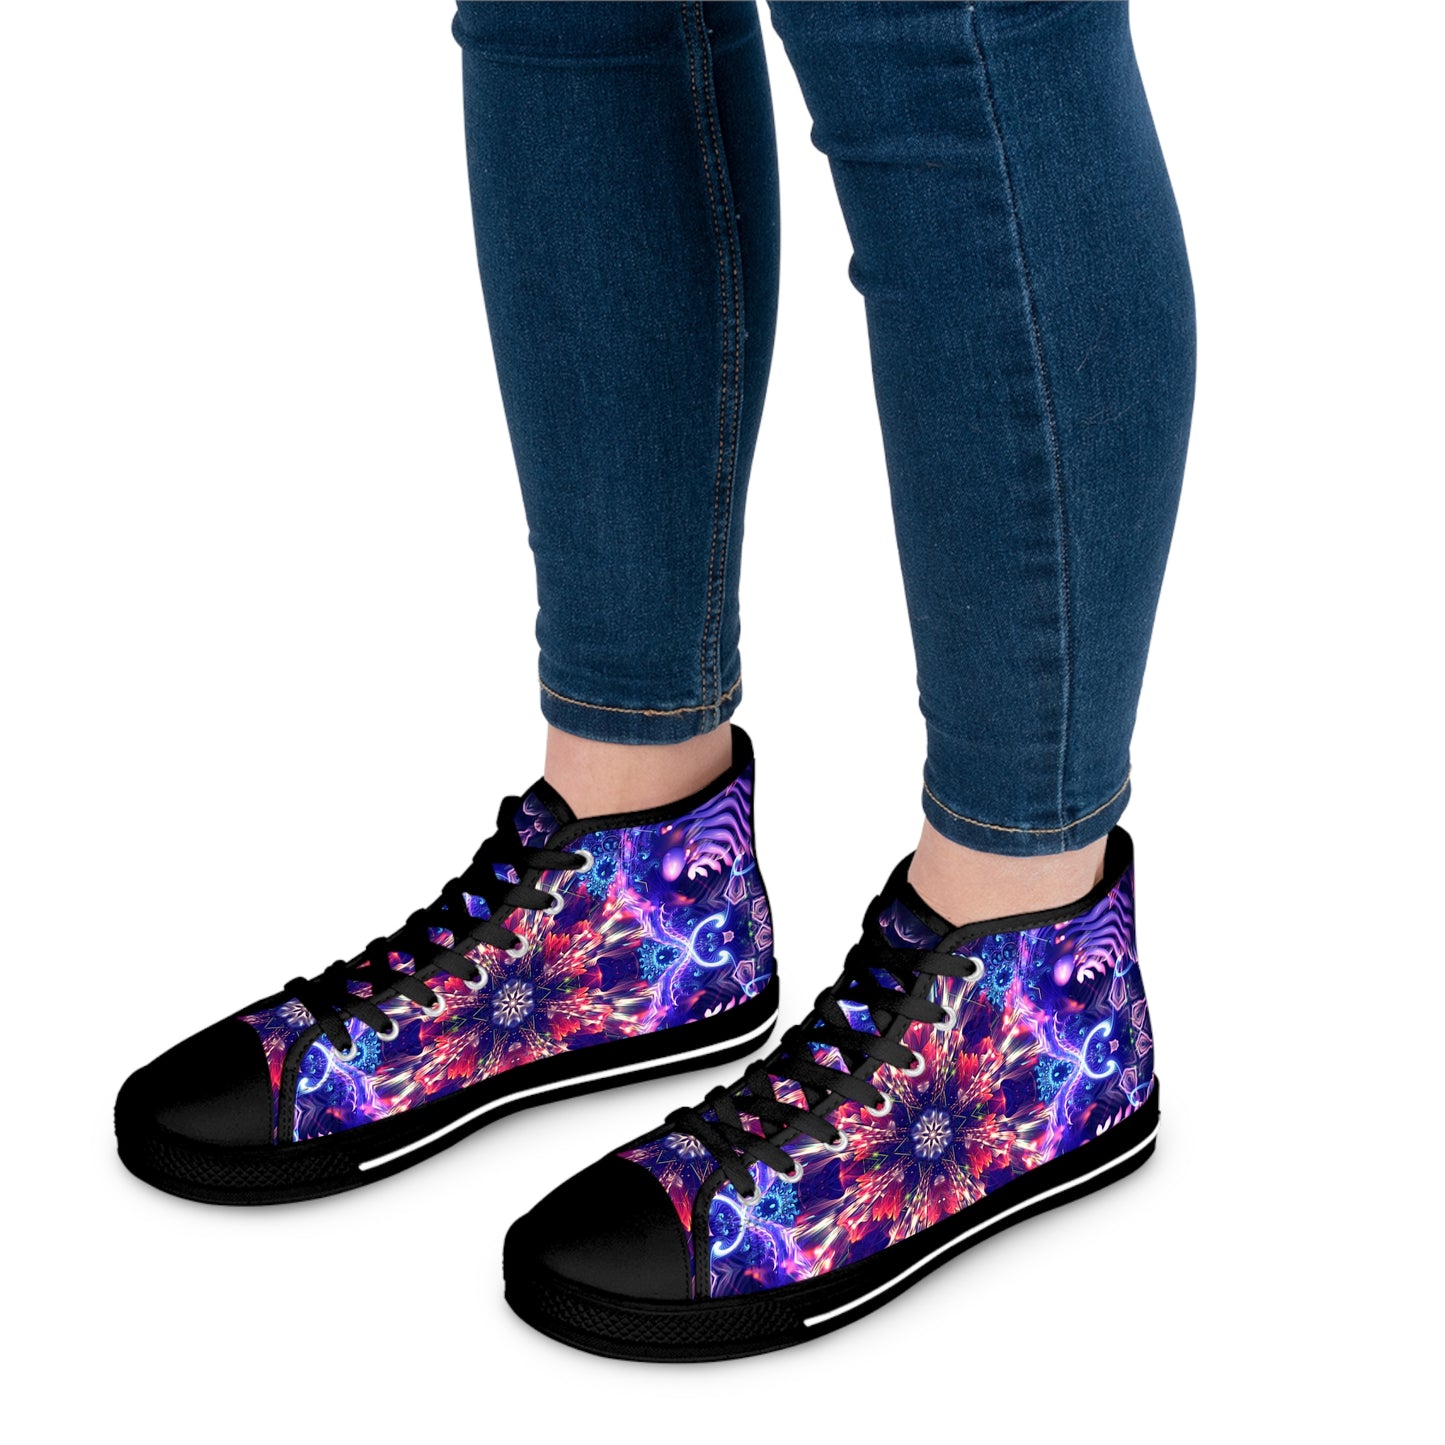 "Flow State" WOMEN'S HIGH TOP SNEAKERS